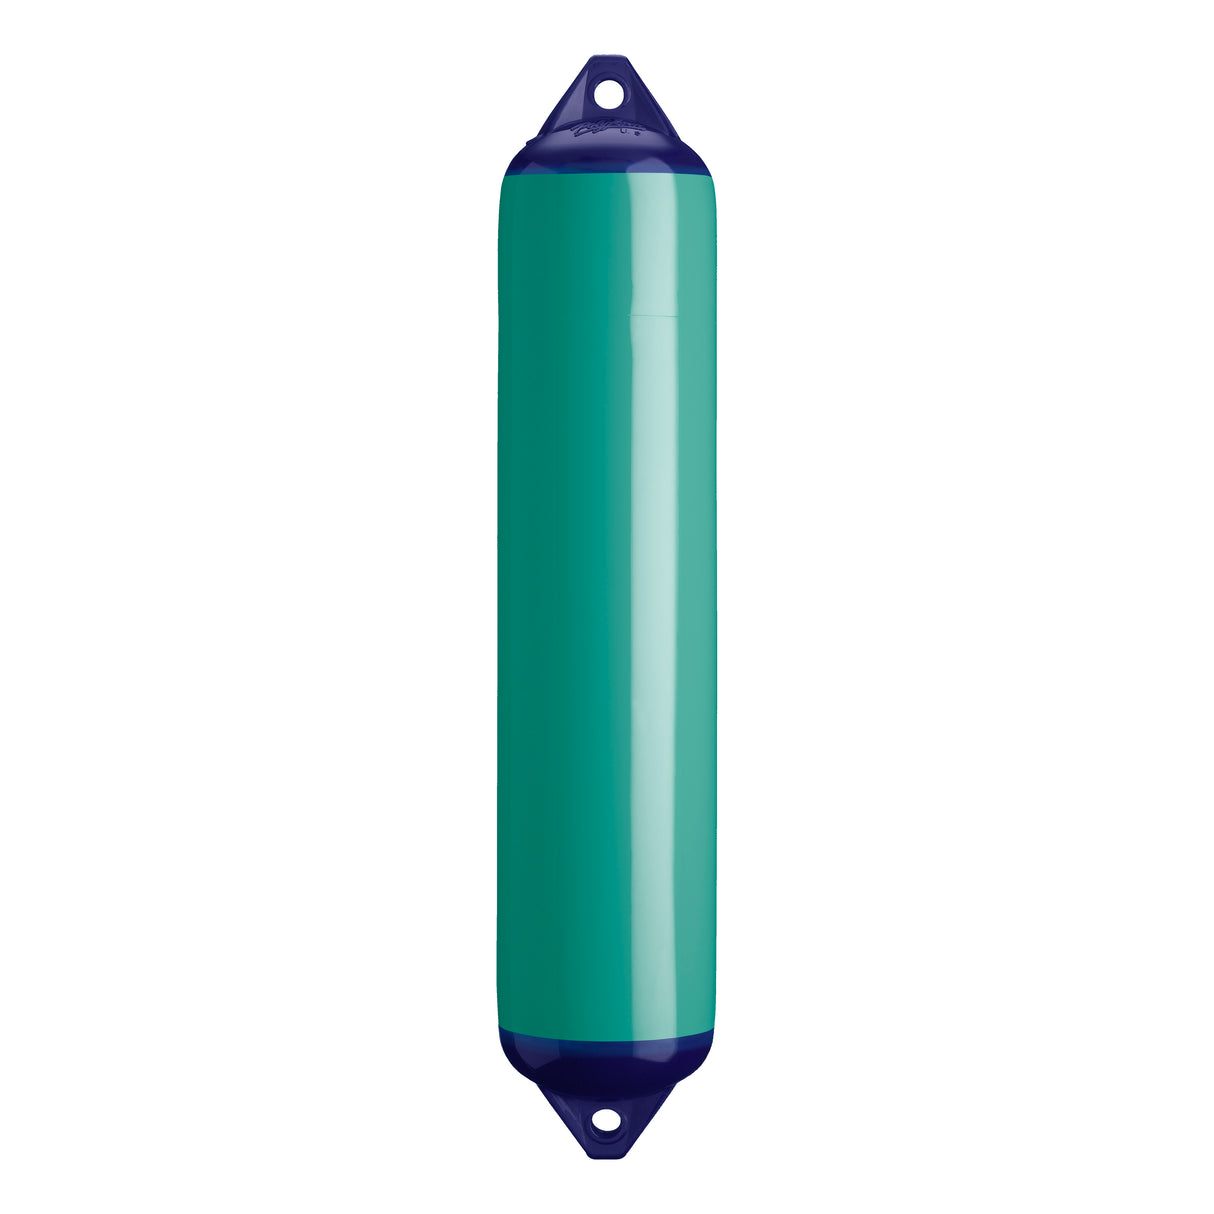 Teal boat fender with Navy-Top, Polyform F-4 